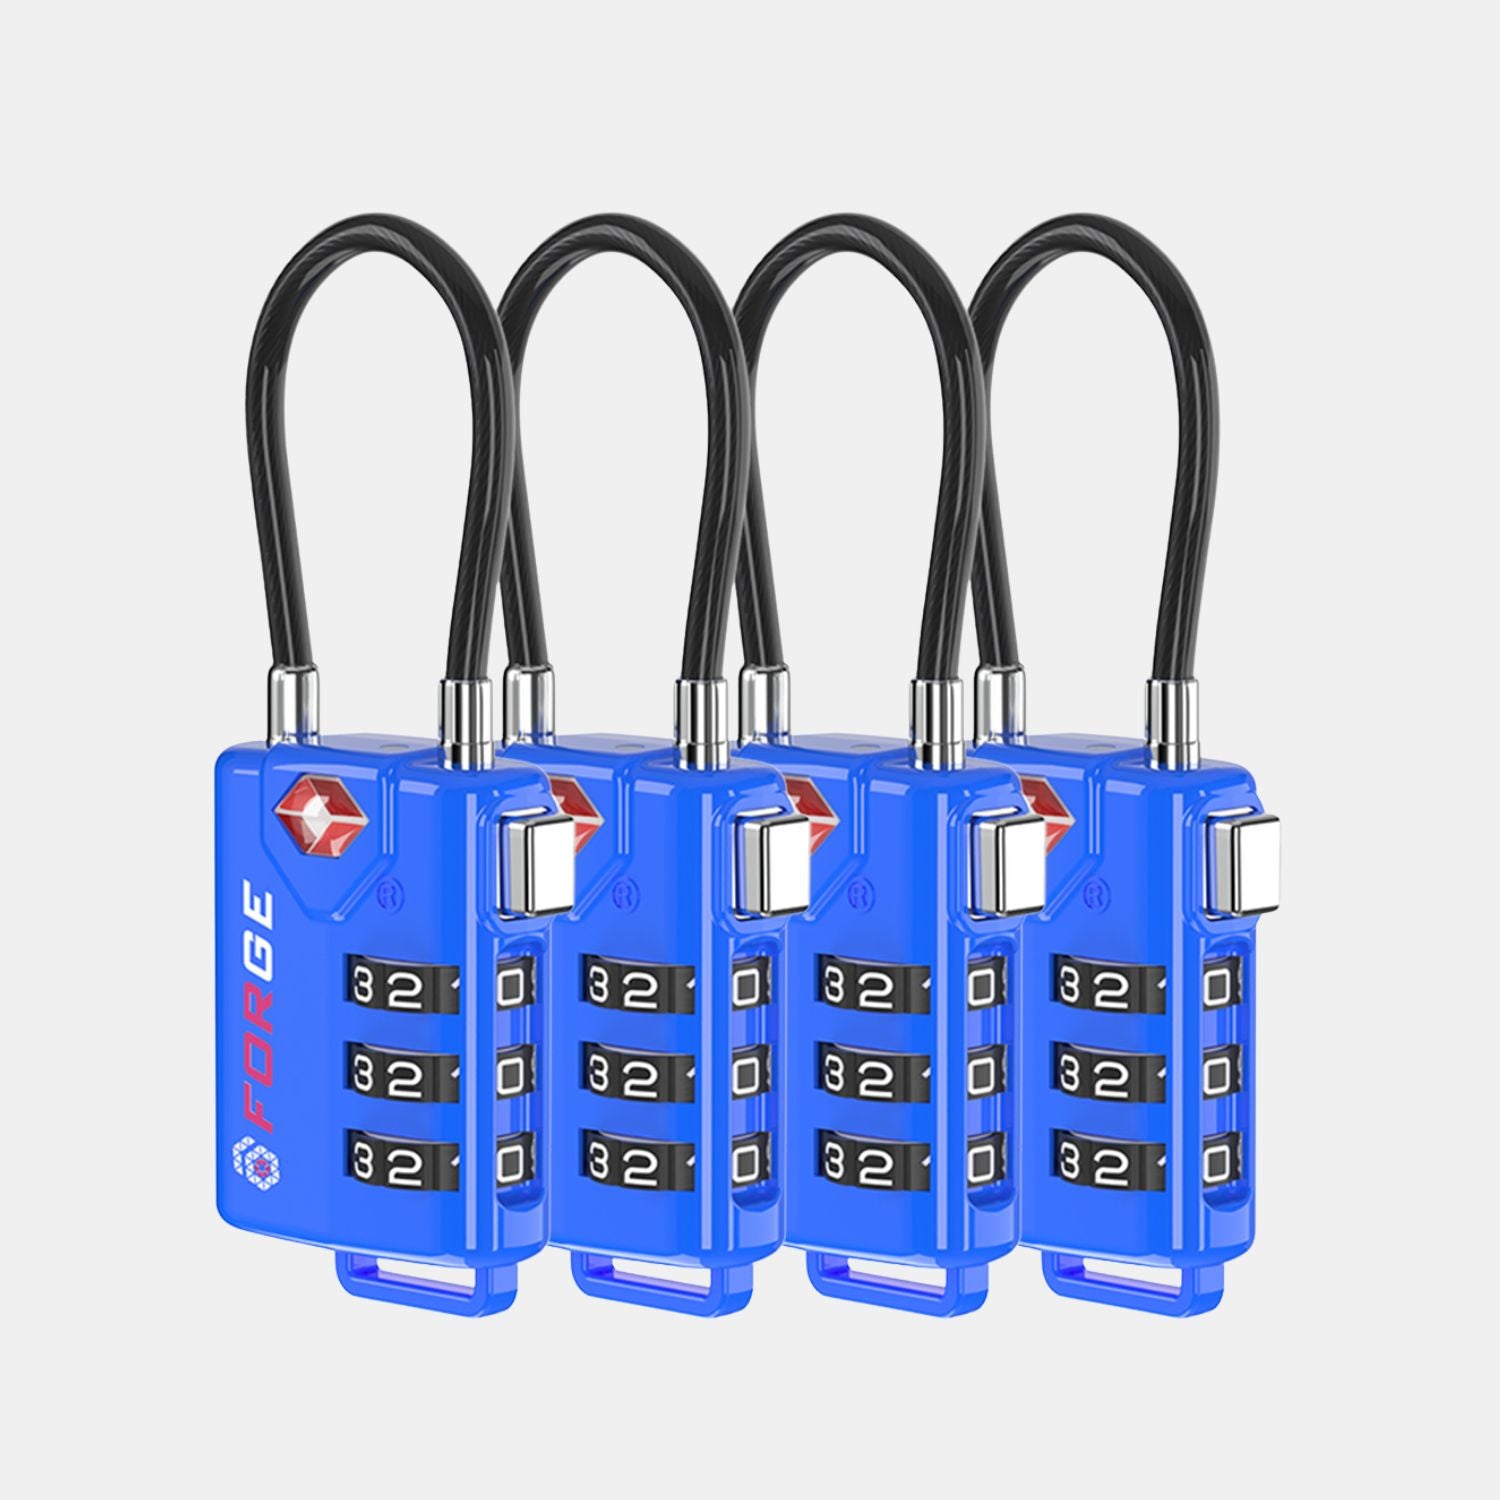 TSA Approved Cable Luggage Lock with Easy-to-Read Dials, Blue 4 Locks